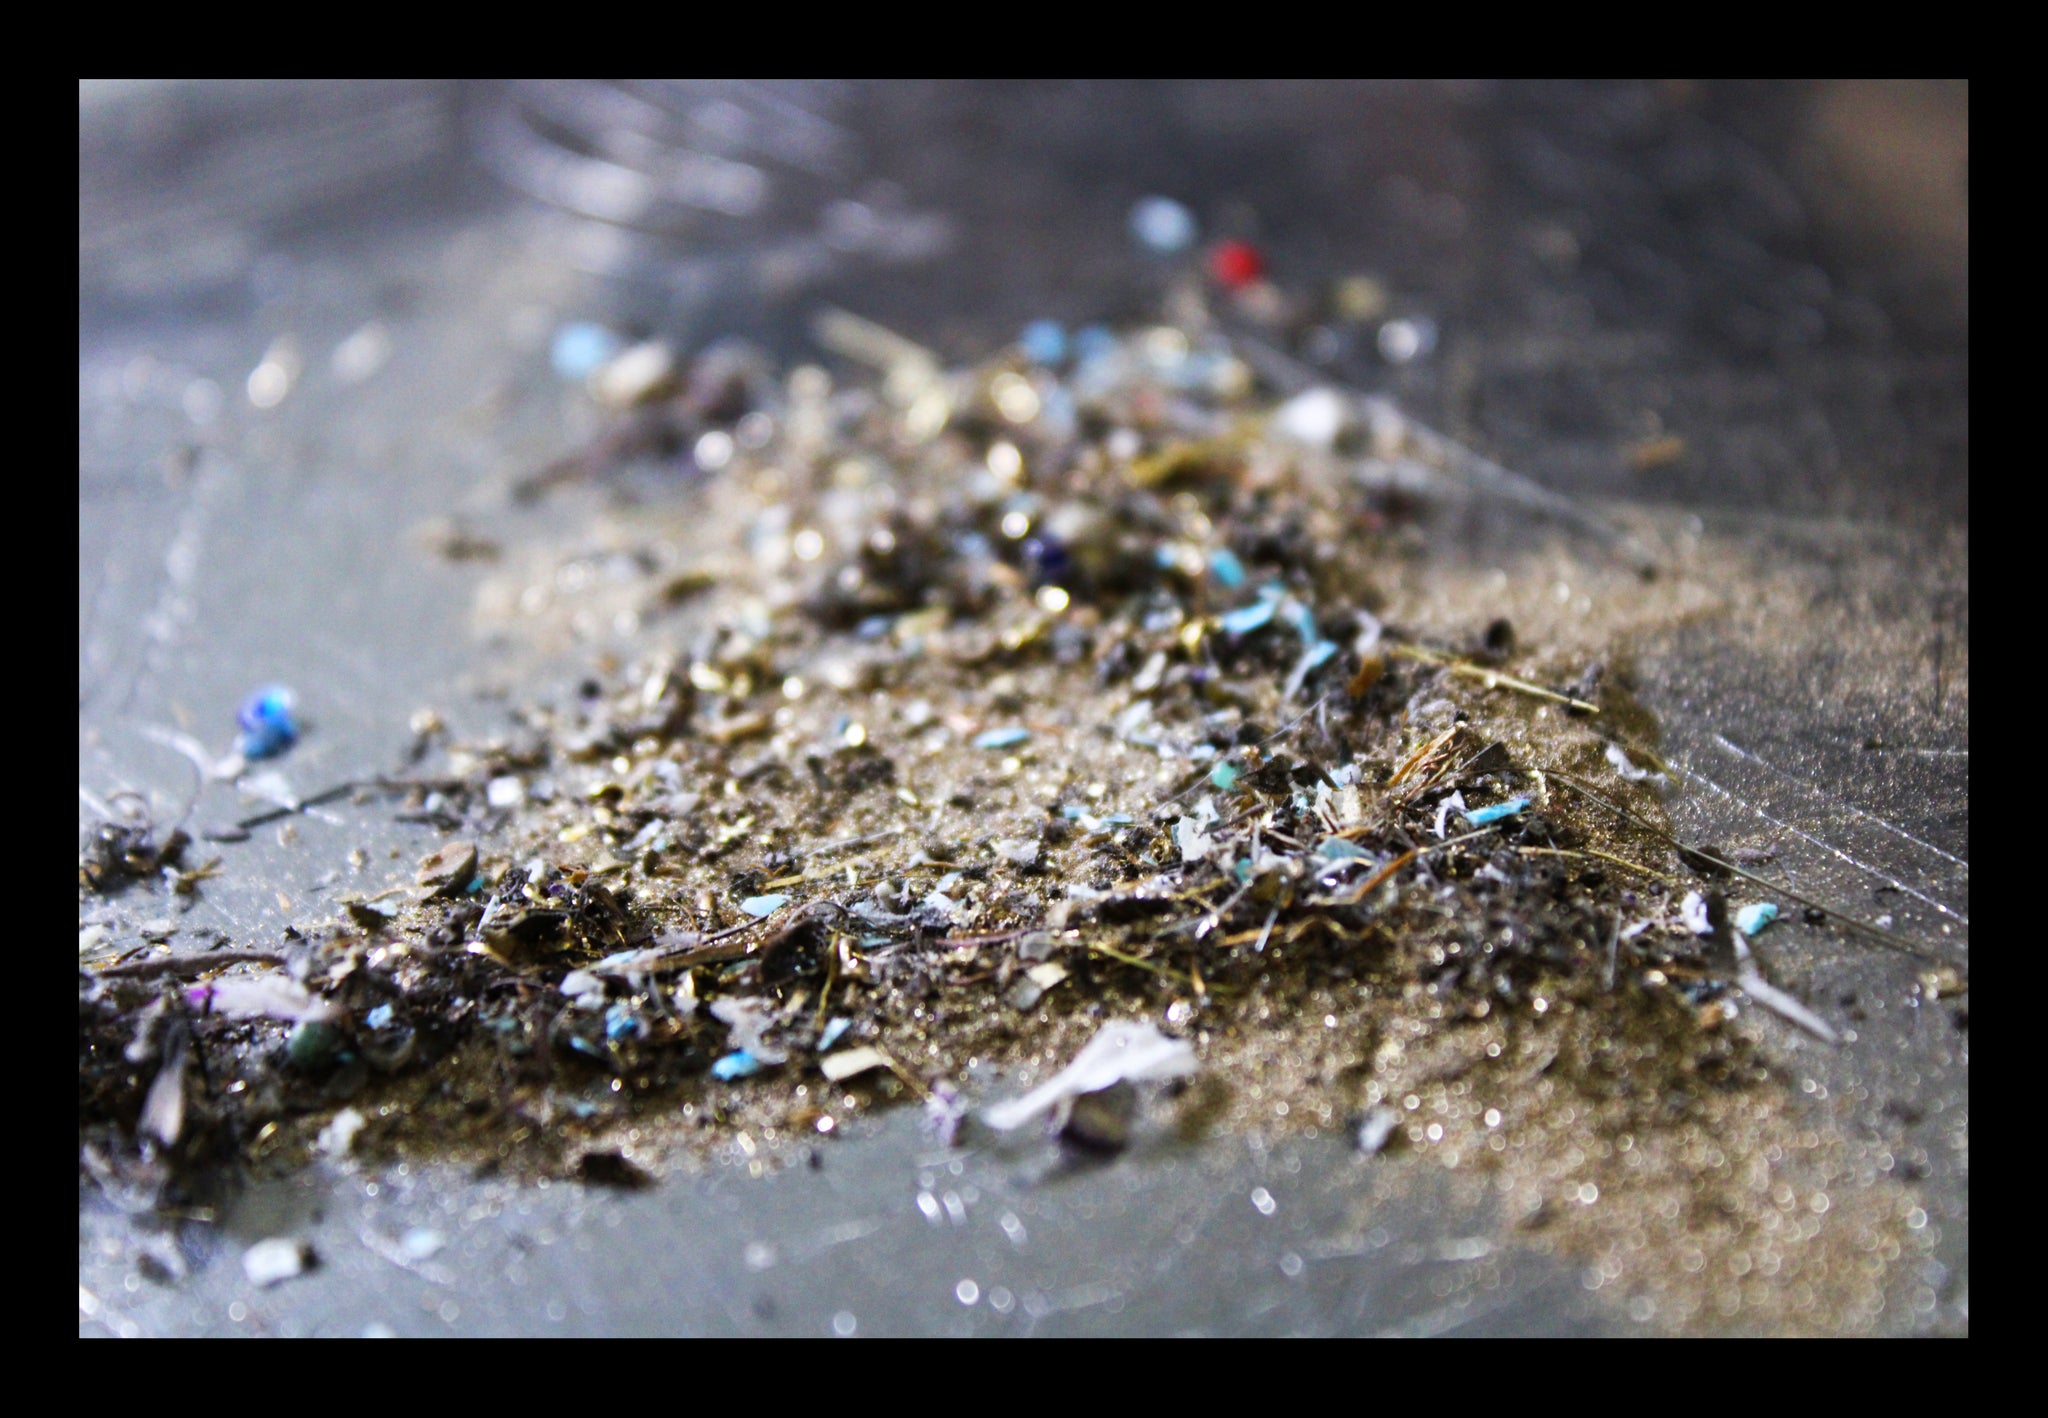 A pile of gold dust and scraps waiting to be refined